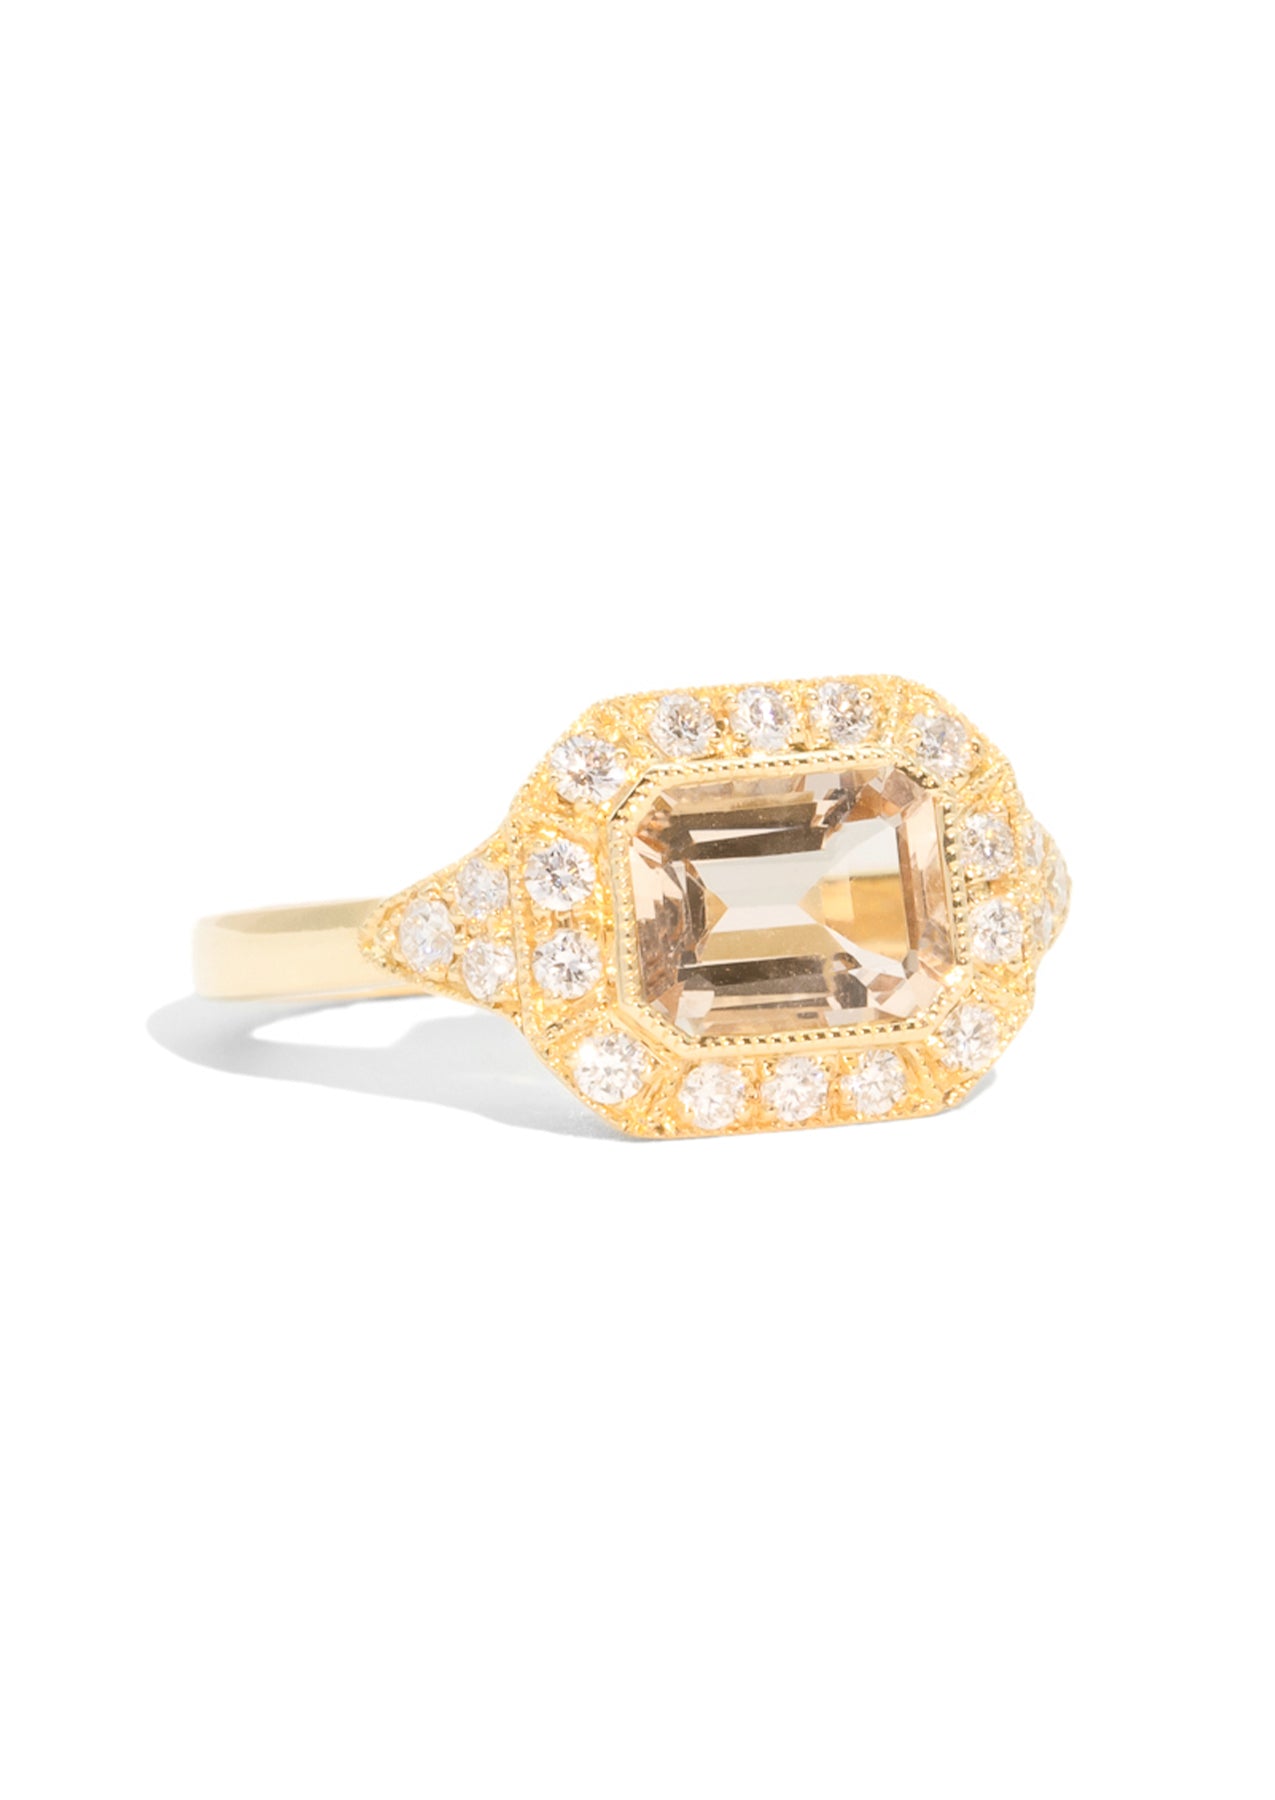 The Elle Ring with 1.46ct Emerald Morganite